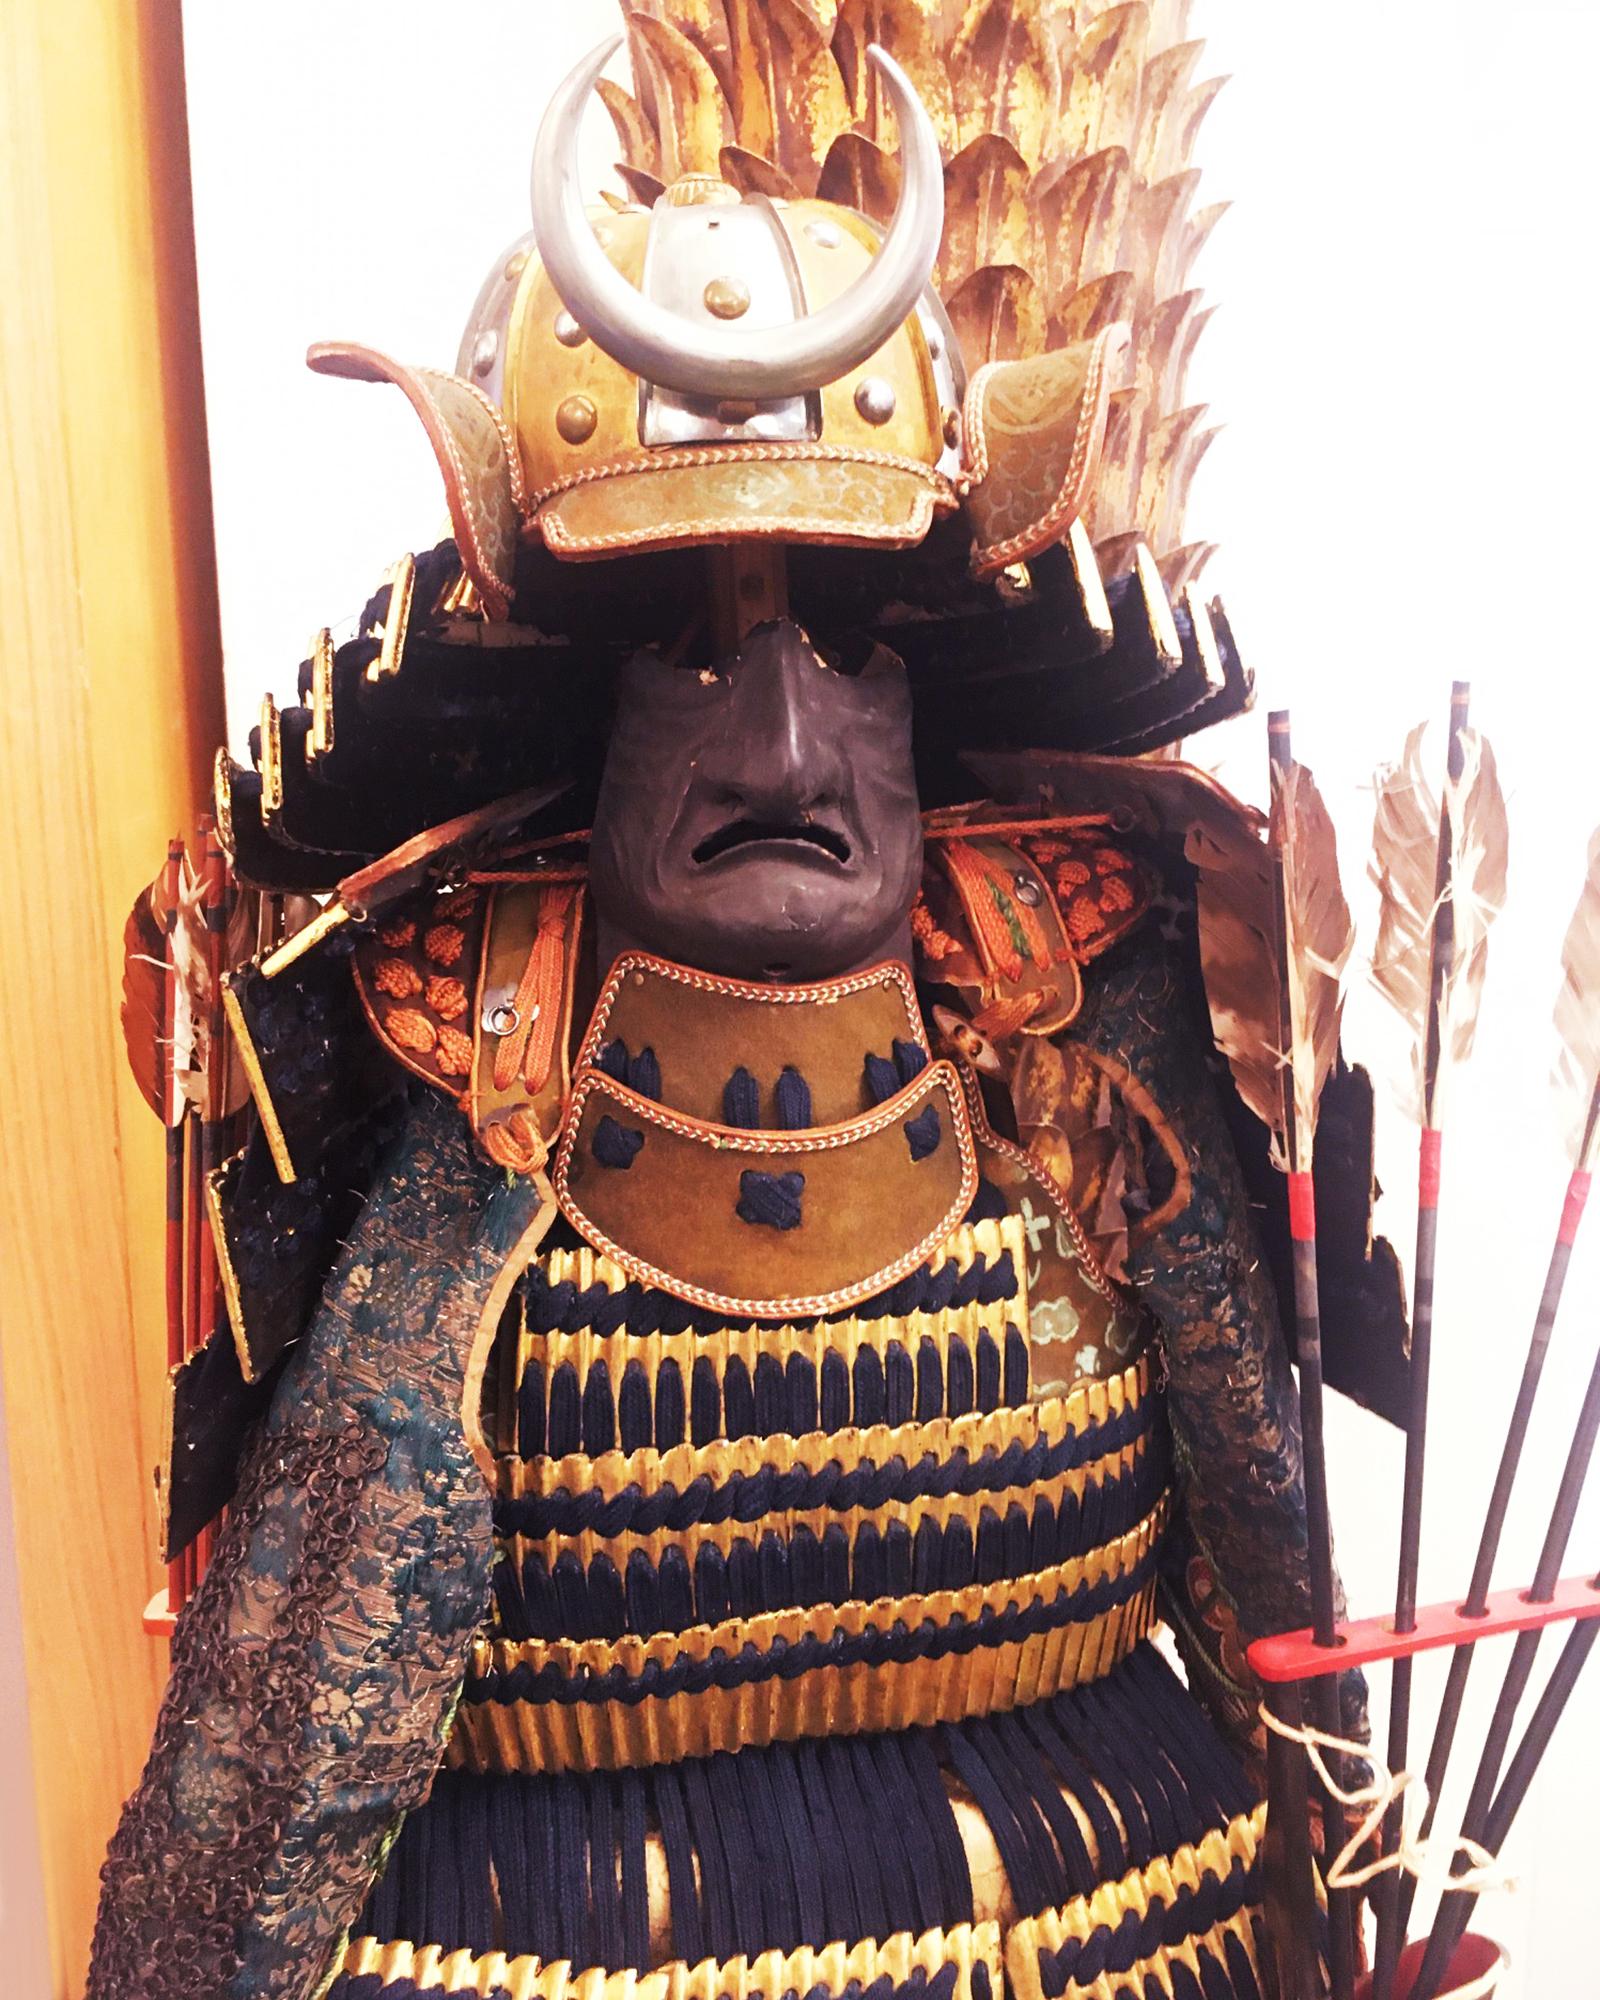 Sculpture Samuraï Yoshitsune Puppet with structure in wood, 
hand-carved wood, hand-painted wood, hand-lacquered 
wood, covered with hand-embroidered silk puppet garments. 
With arrows and storage trunk included. All details are hand-
carved,